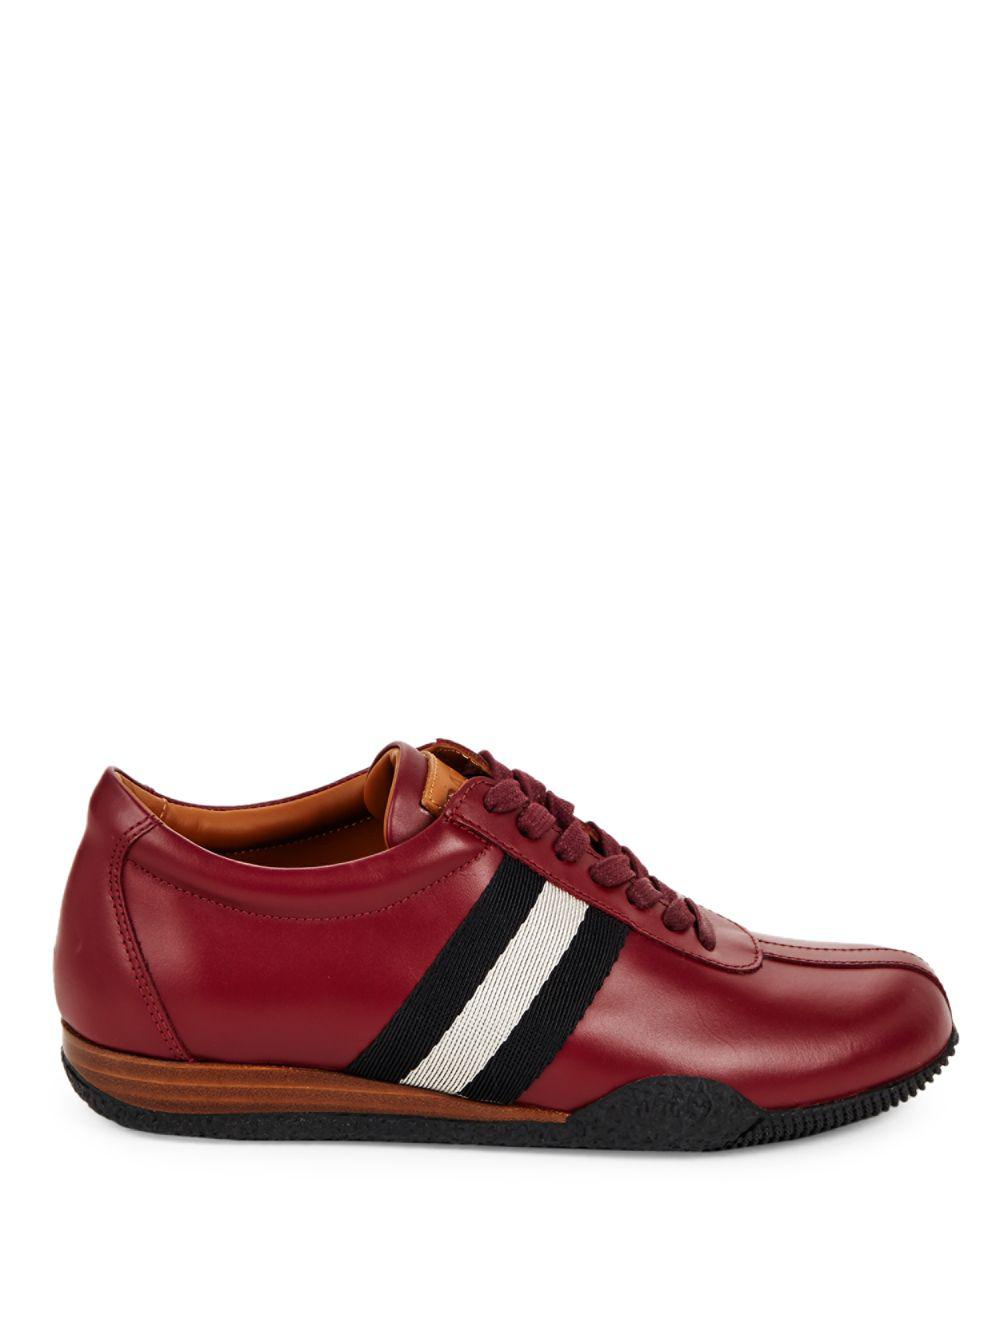 Bally Leather Round Toe Striped Sneakers in Red for Men - Lyst